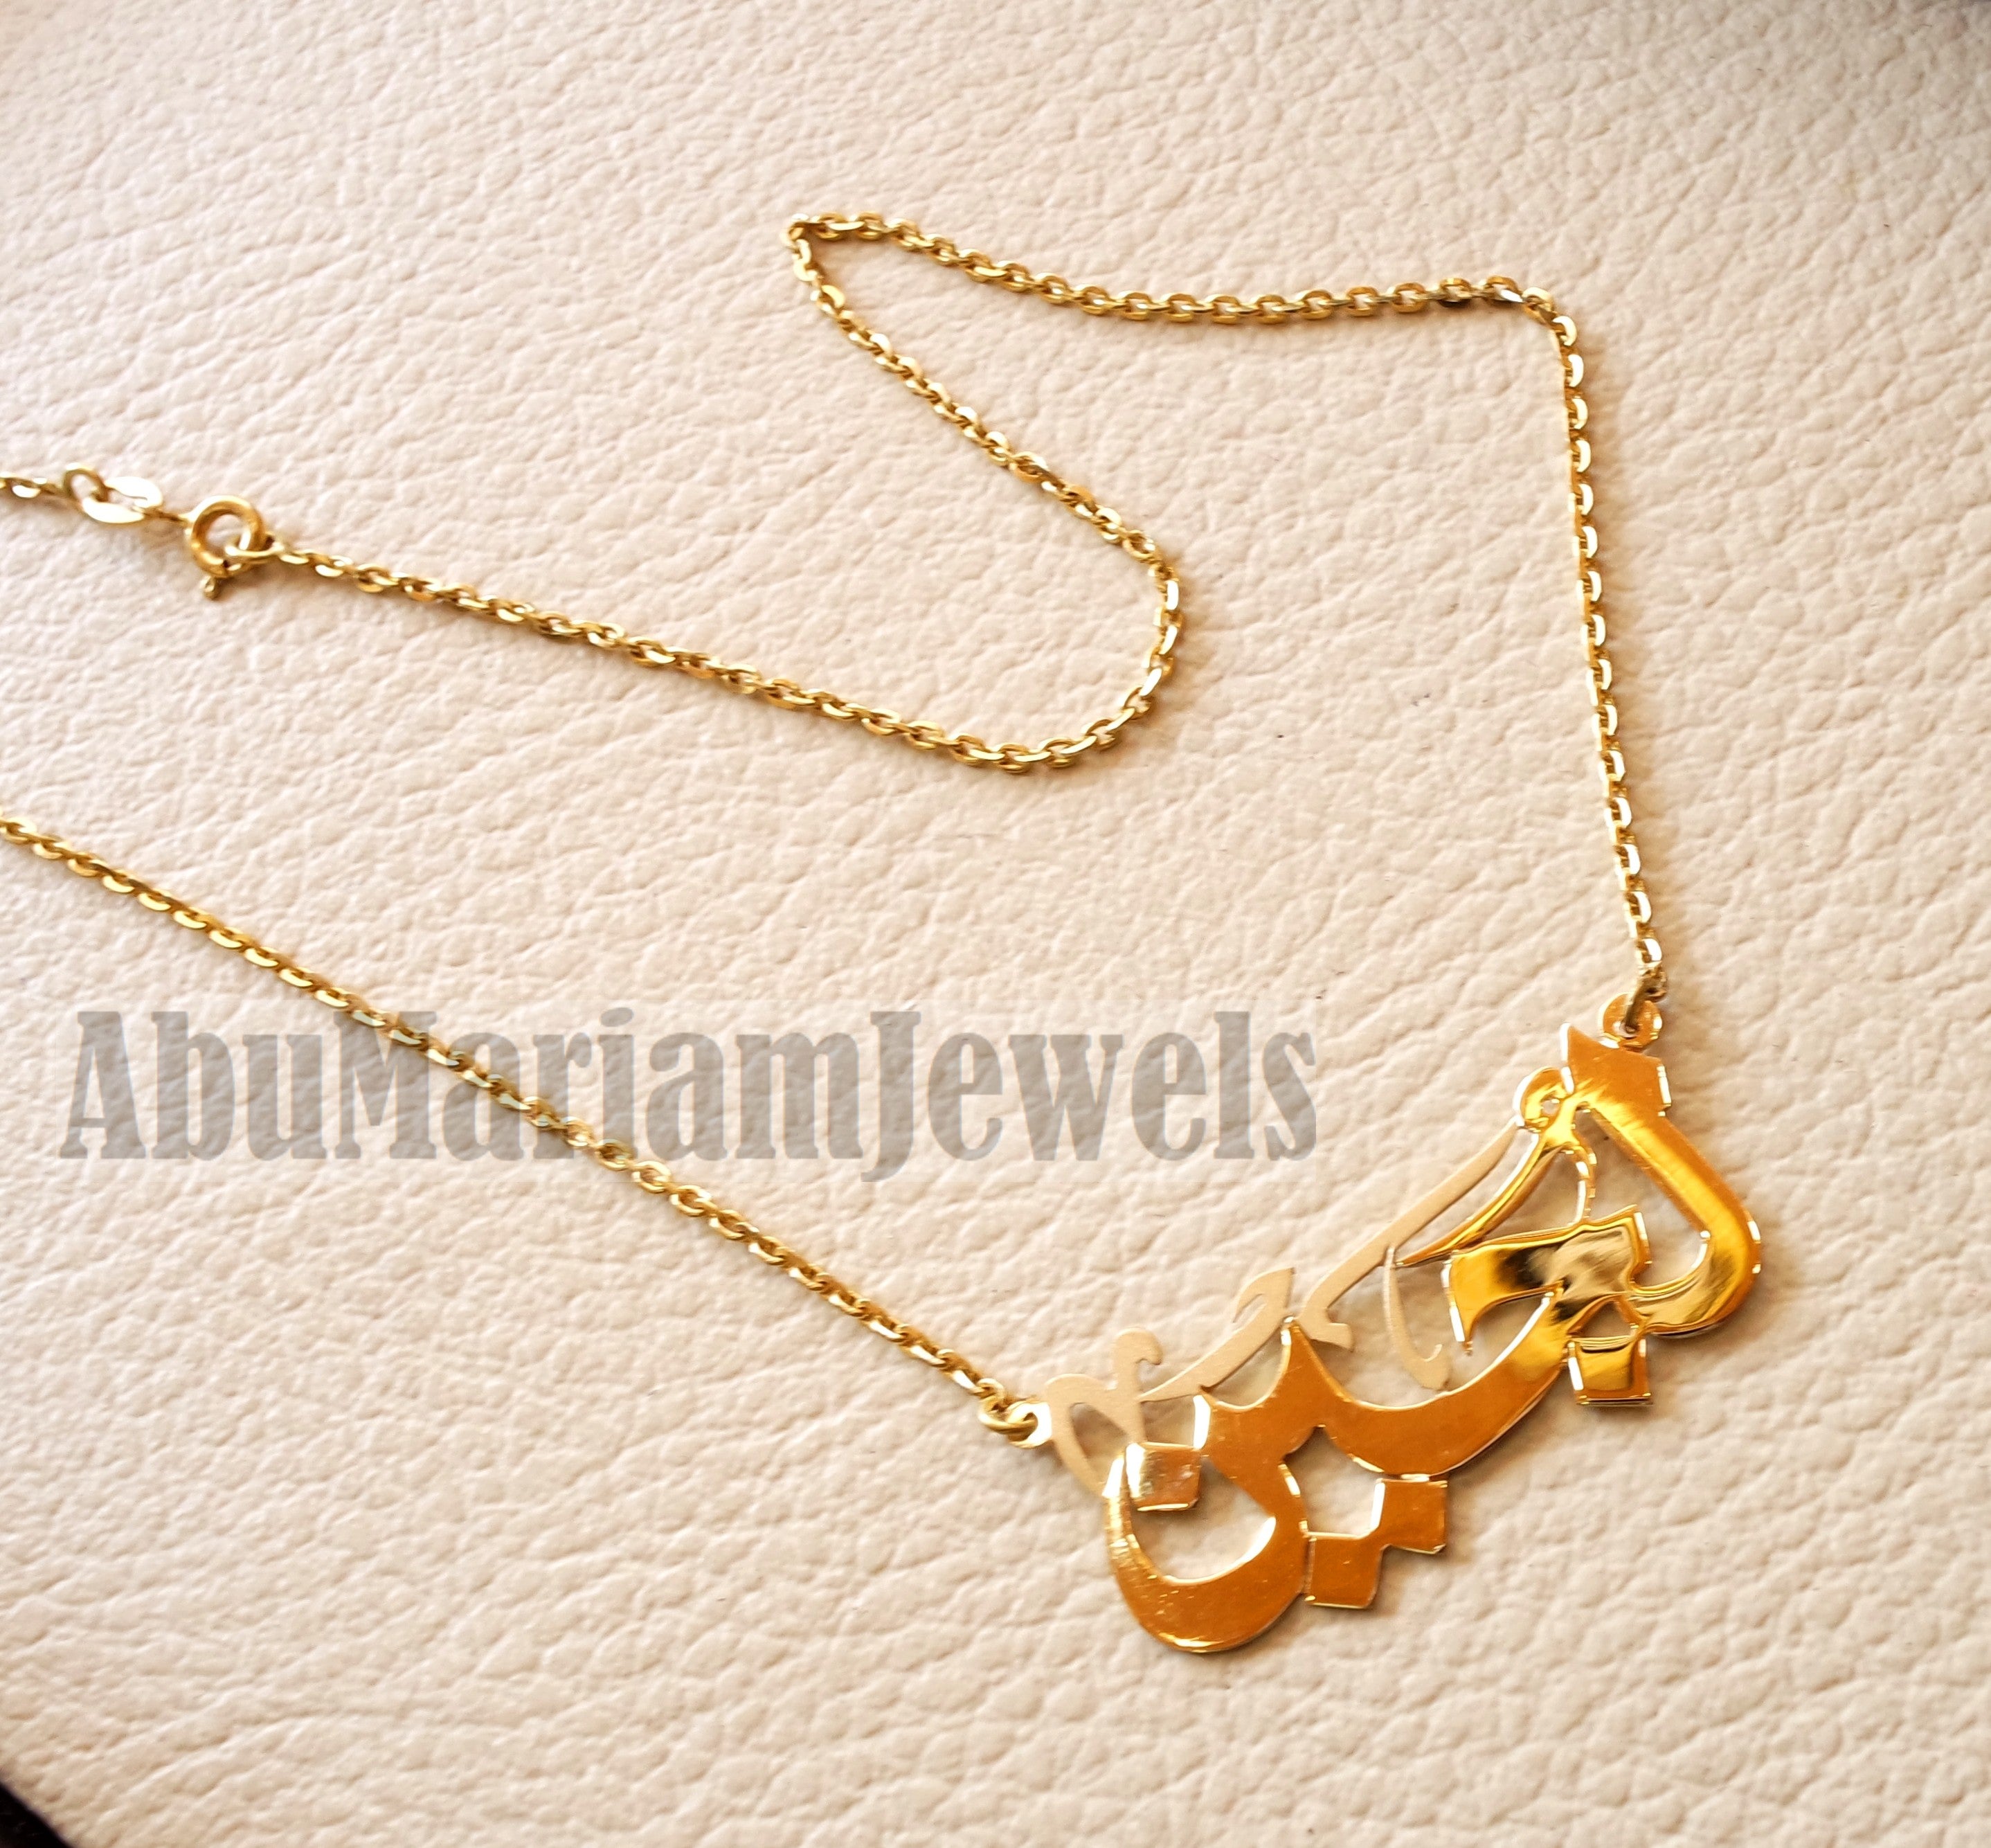 personalized customized 1 name 18 k gold arabic calligraphy pendant with chain standard , pear , rectangular or any shape fine jewelry N1009